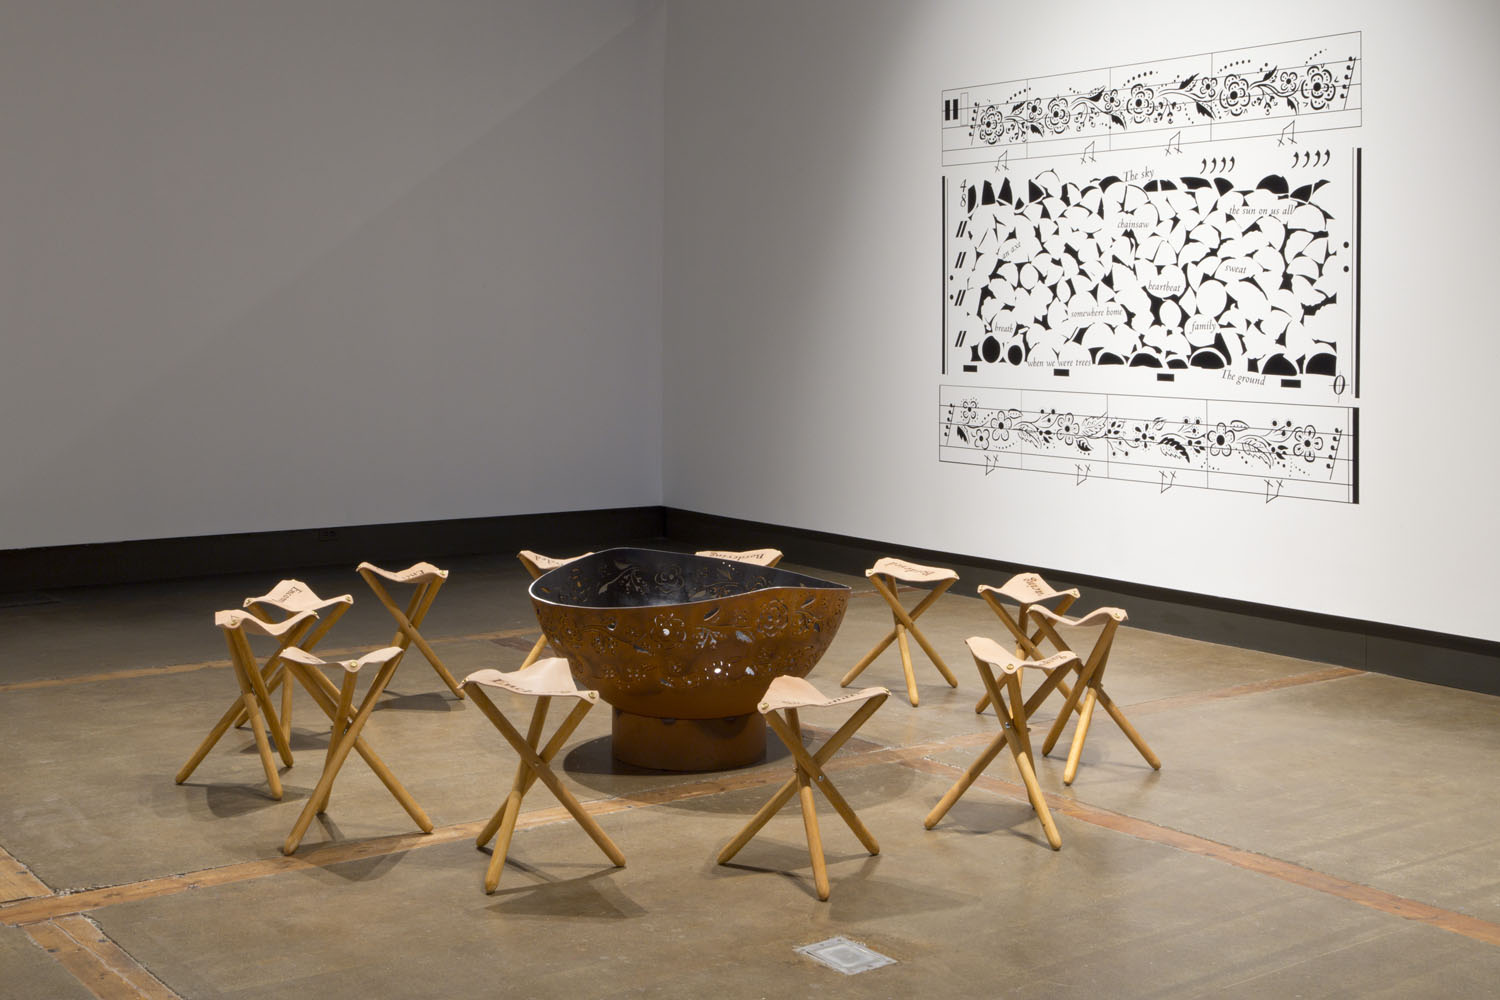 Installation view of Surrounded/Surrounding, a circular arrangement of leather stools around a copper fire bowl etched with a floral pattern, in front of a white gallery wall with a black vinyl transfer of a large pattern of shapes and text